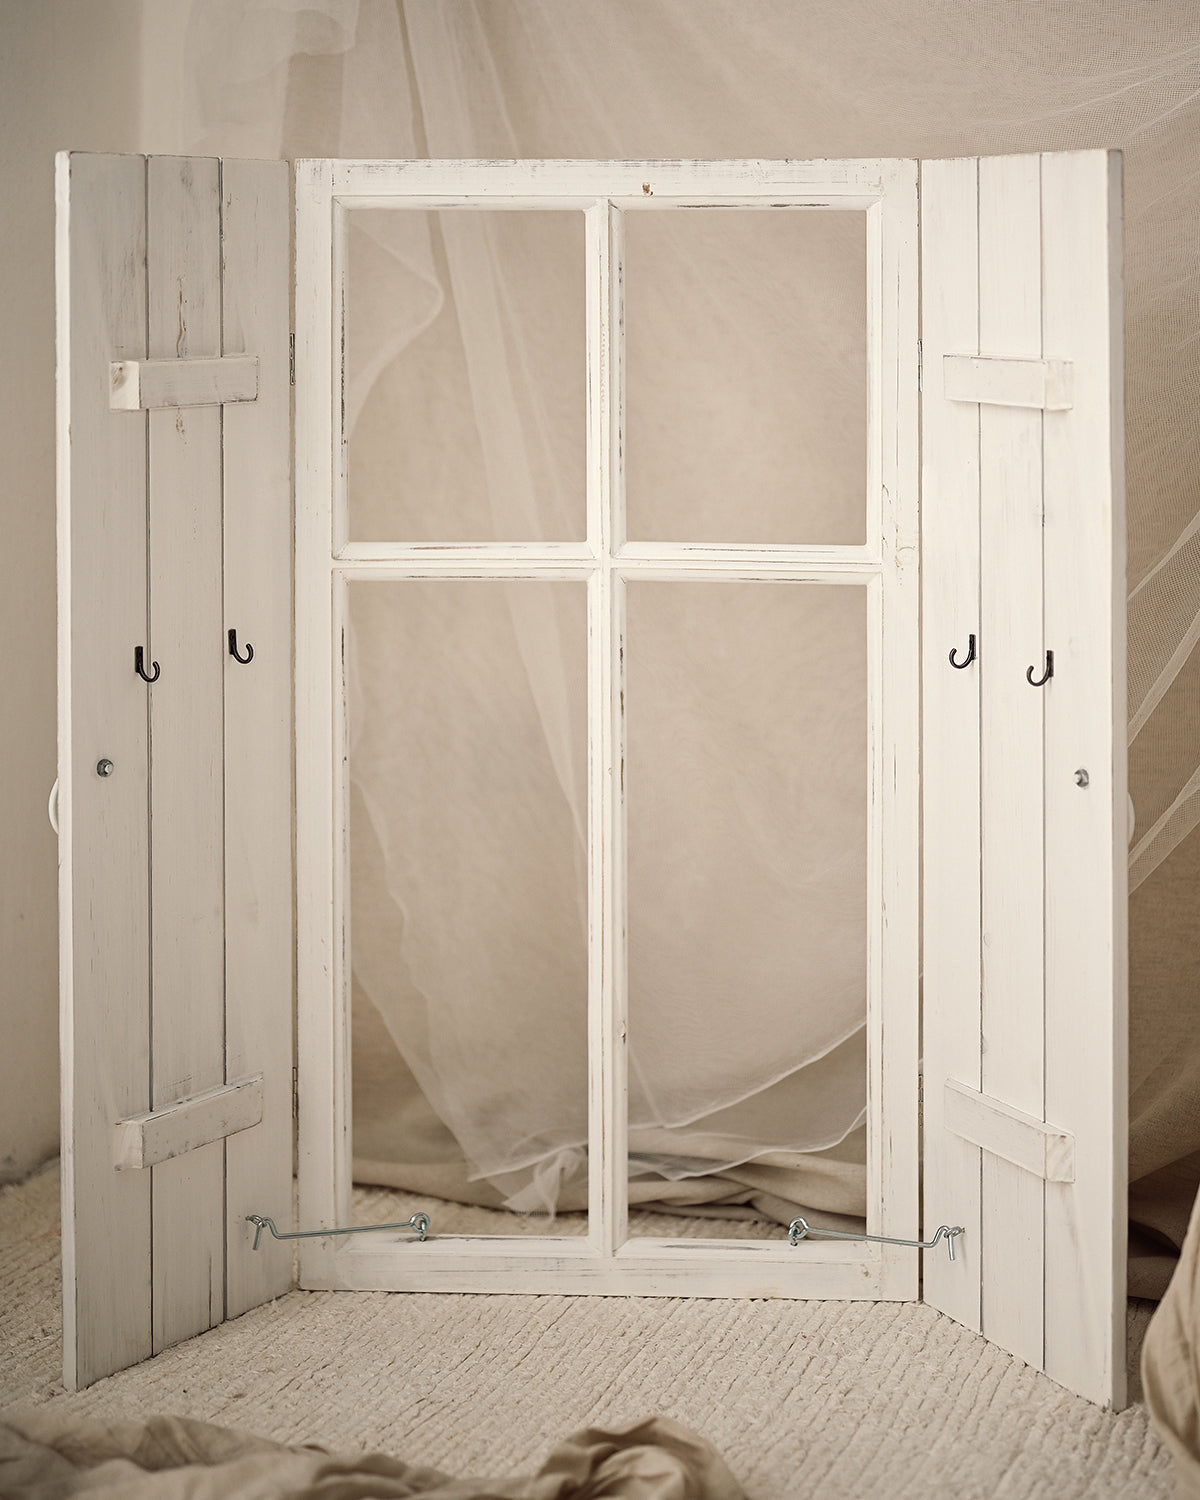 Rosi - Window with shutters